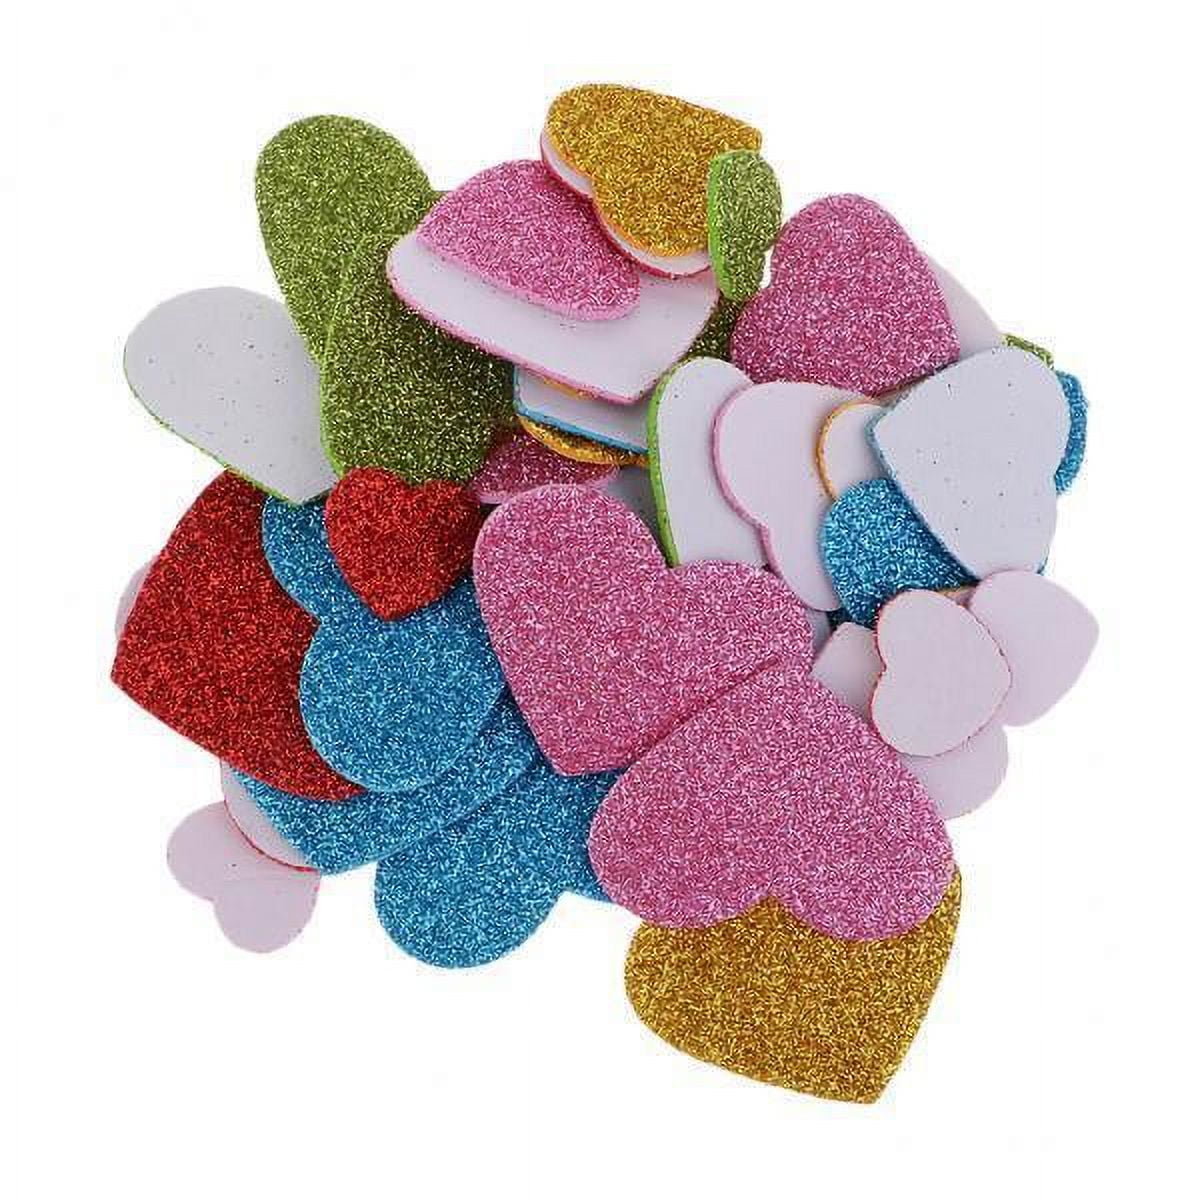 Glitter Heart Stickers for Kids - Small Self Adhesive Heart Sticker for Scrapbooking, 1200pcs Kids Rainbow Love Decorative Sticker for Kid's Arts Craf